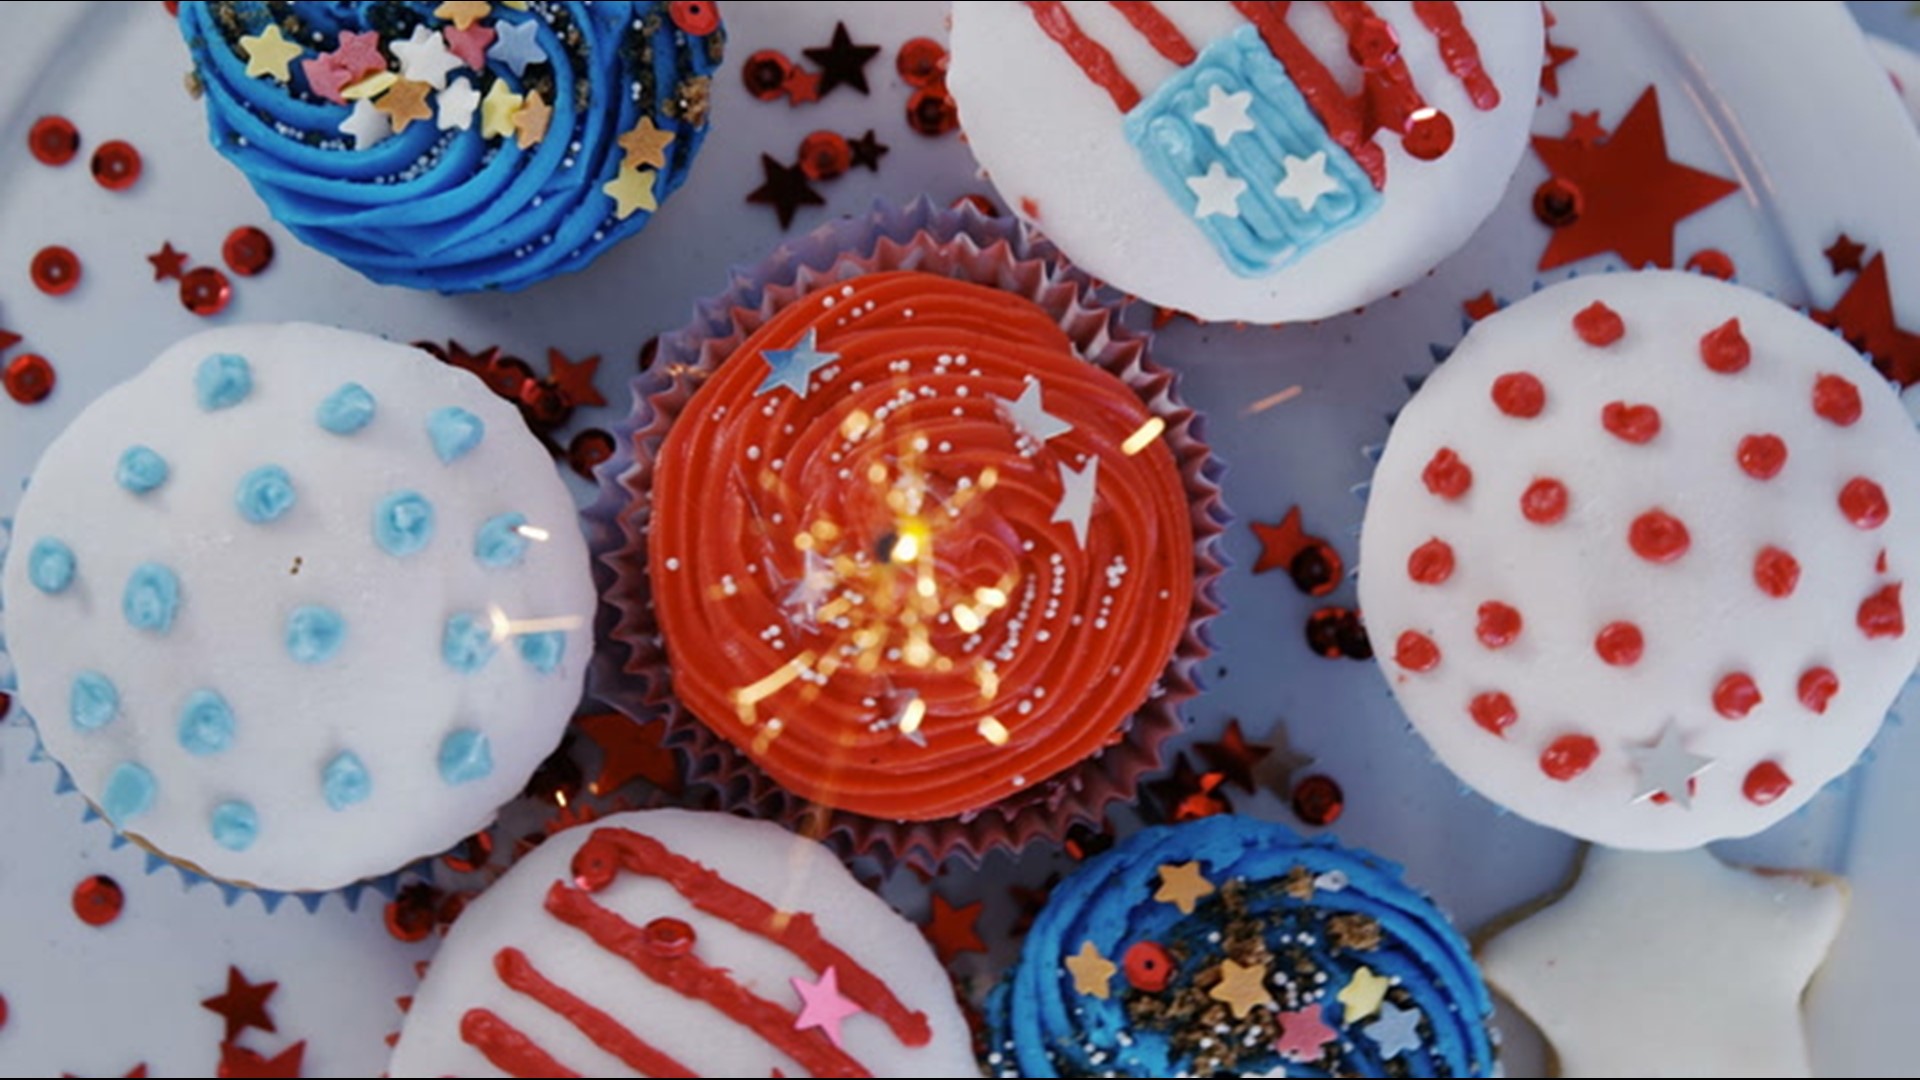 Although coronavirus has changed Independence Day plans for many across the United States, there are still many ways to celebrate during this pandemic.